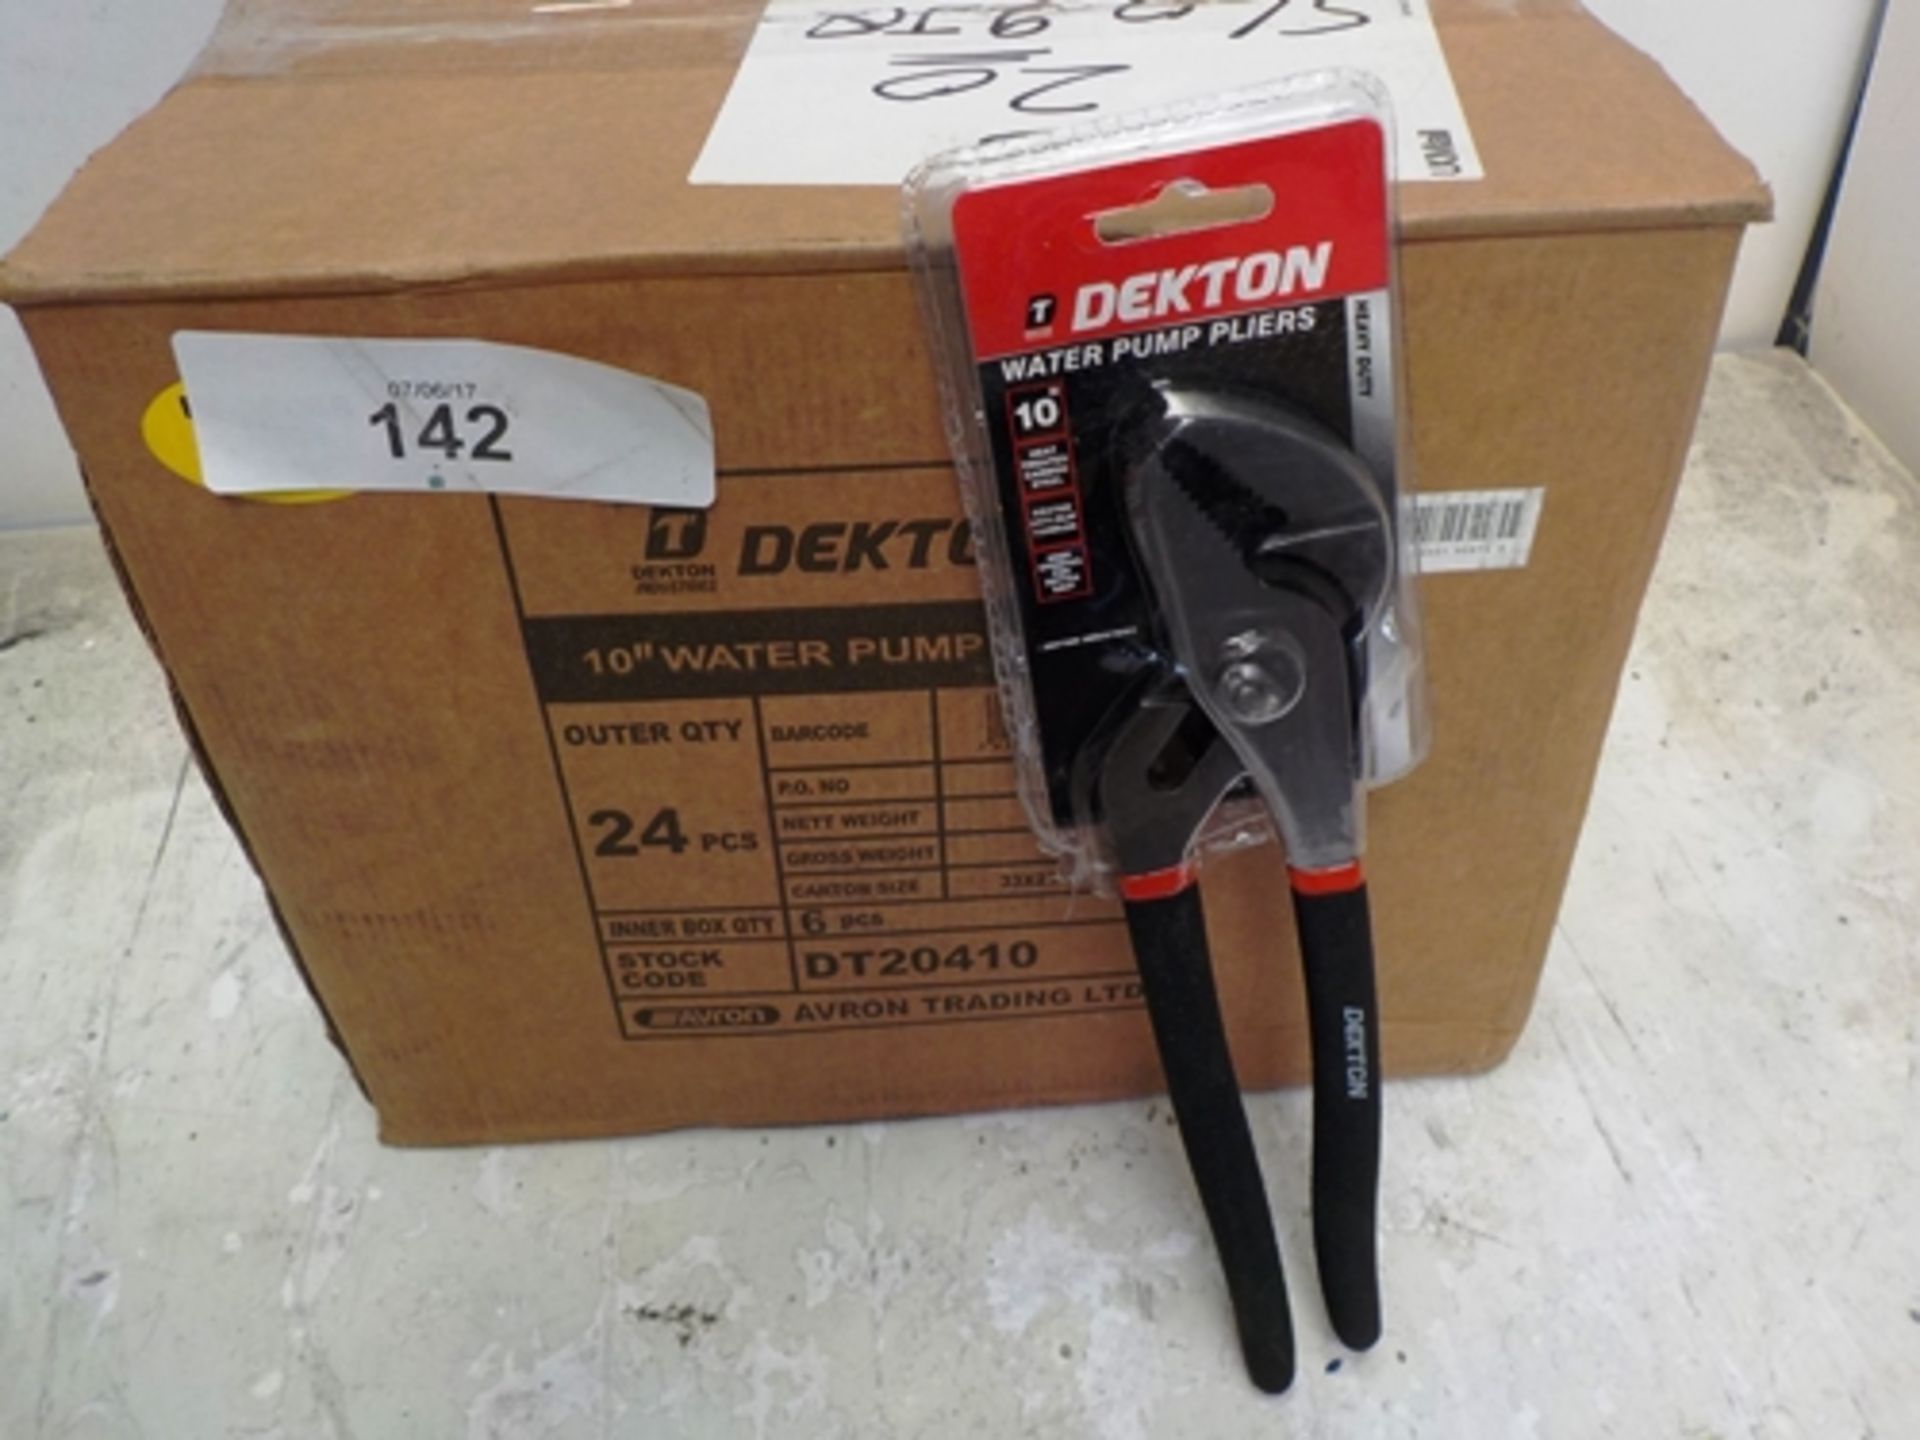 Approximately 24 x Dekton water pump pliers, code DT20410 - New in pack (TC5)